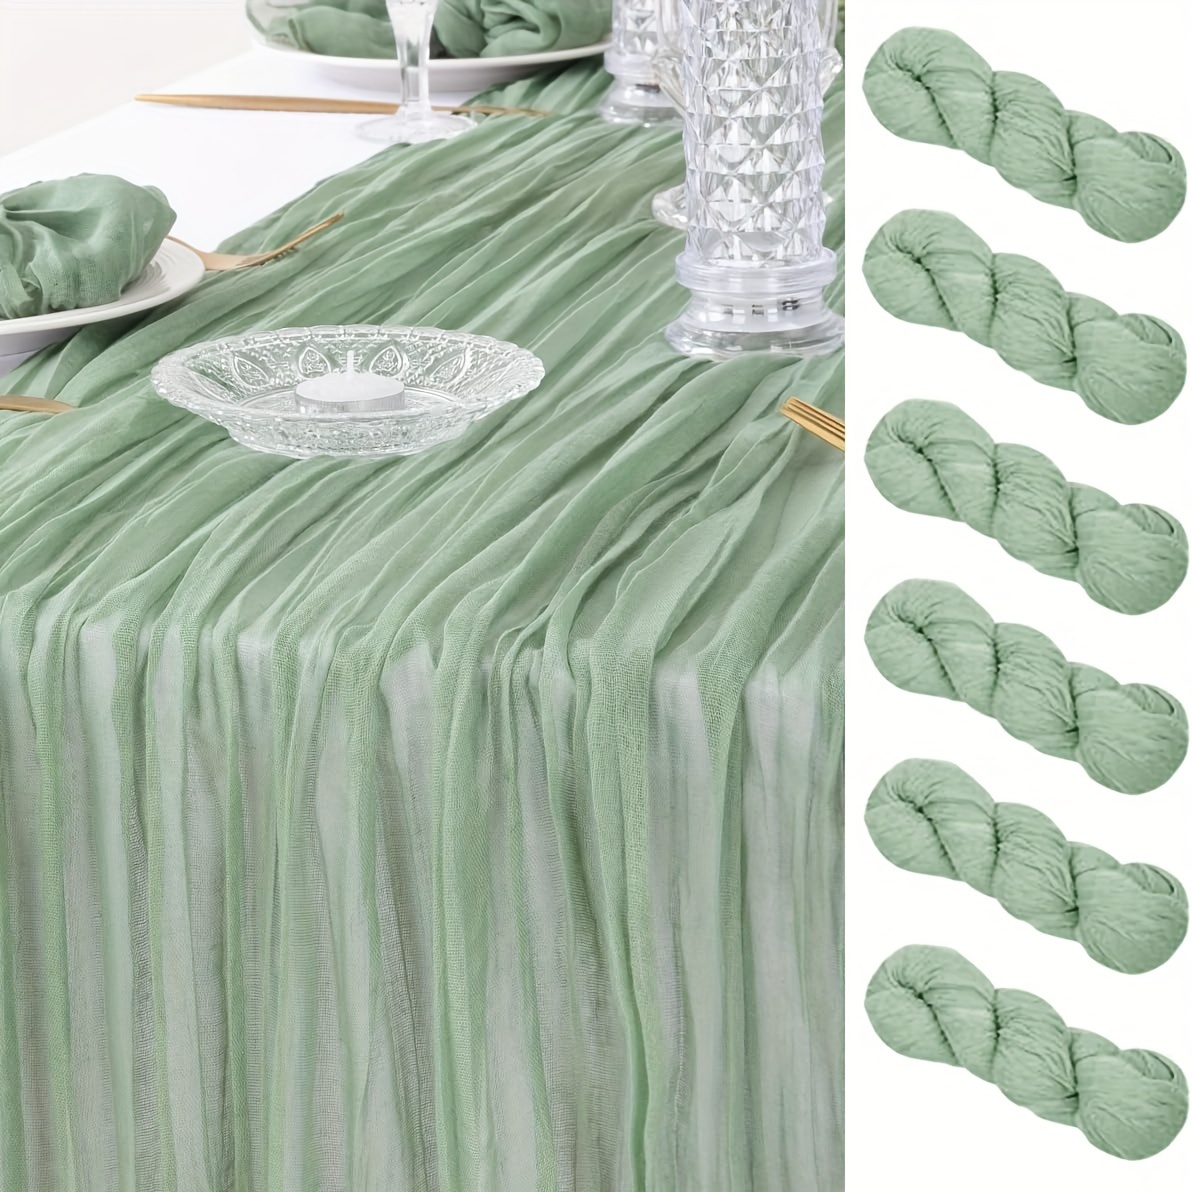 

sheer" 6-piece Elegant Tulle Tablecloths - 25.5"x70.8" | Perfect For Weddings, Baby Showers, Birthdays & Easter Decorations